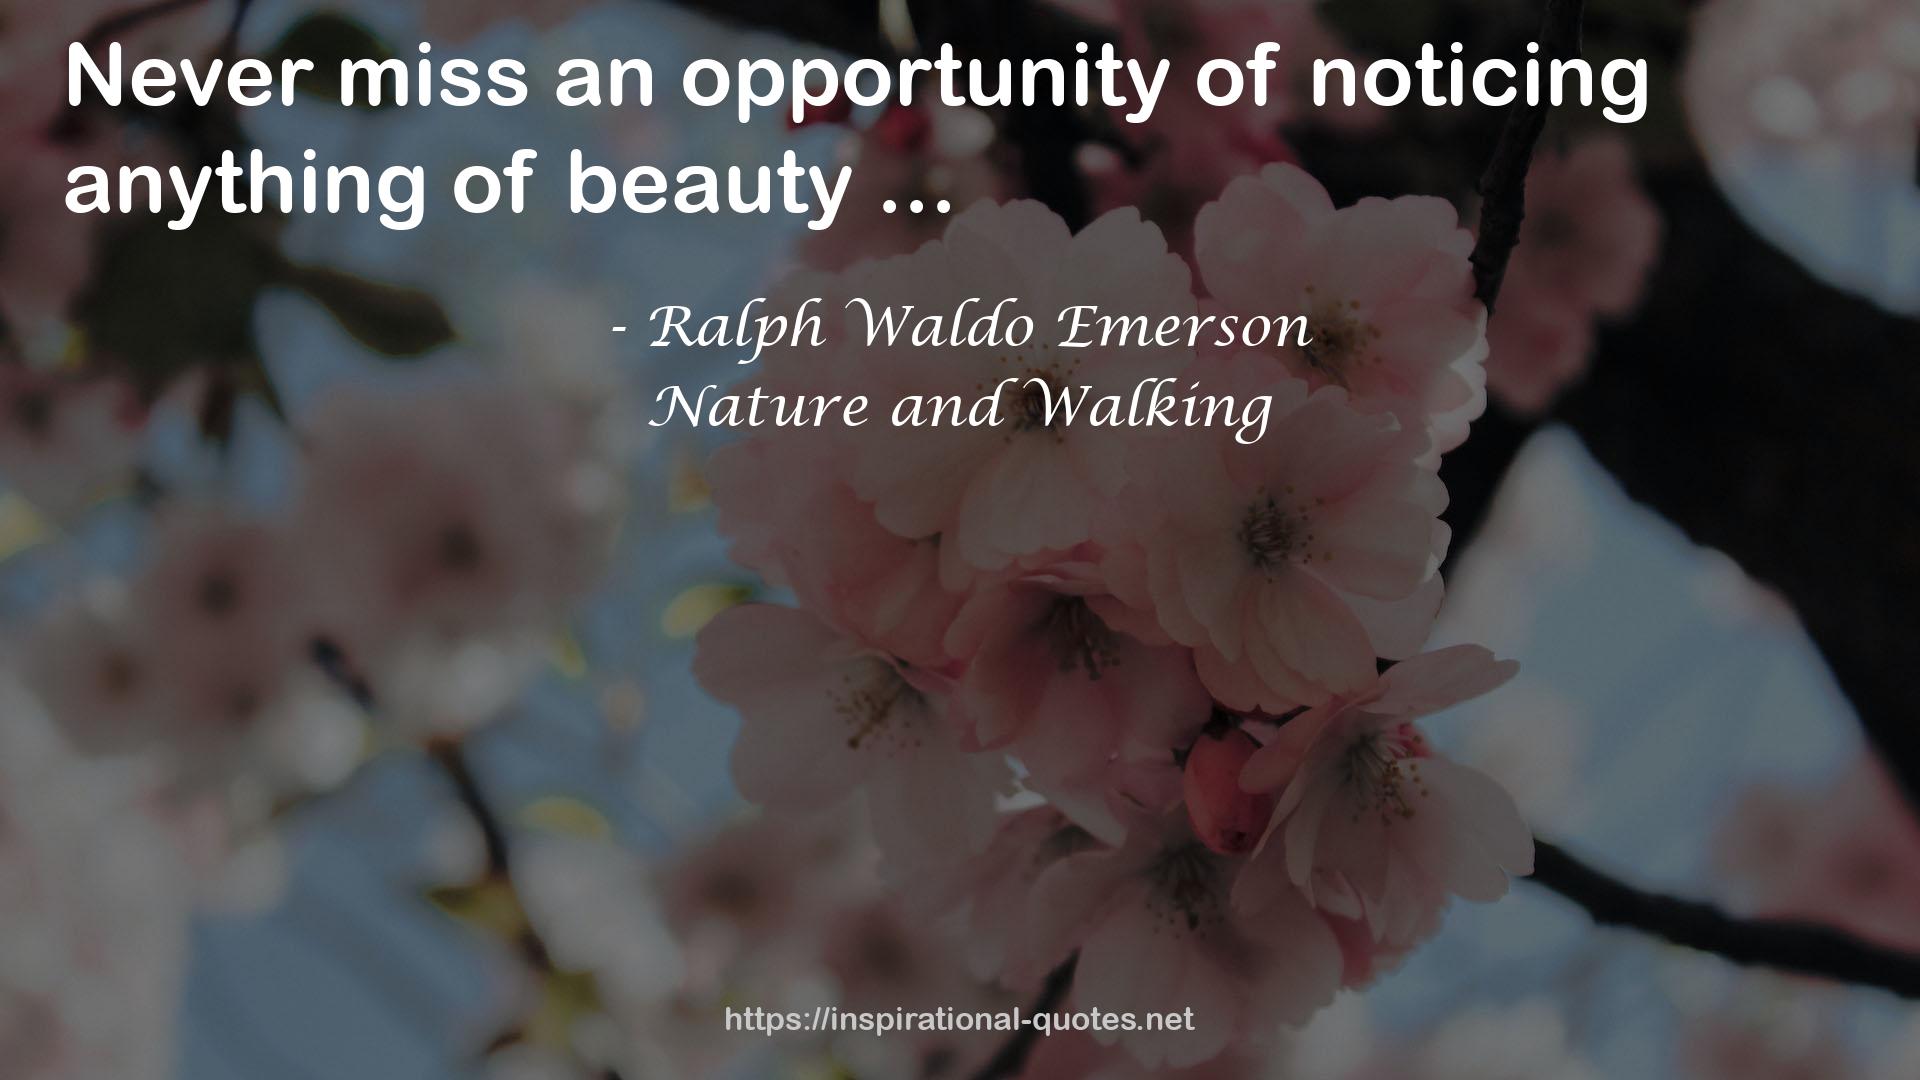 Nature and Walking QUOTES